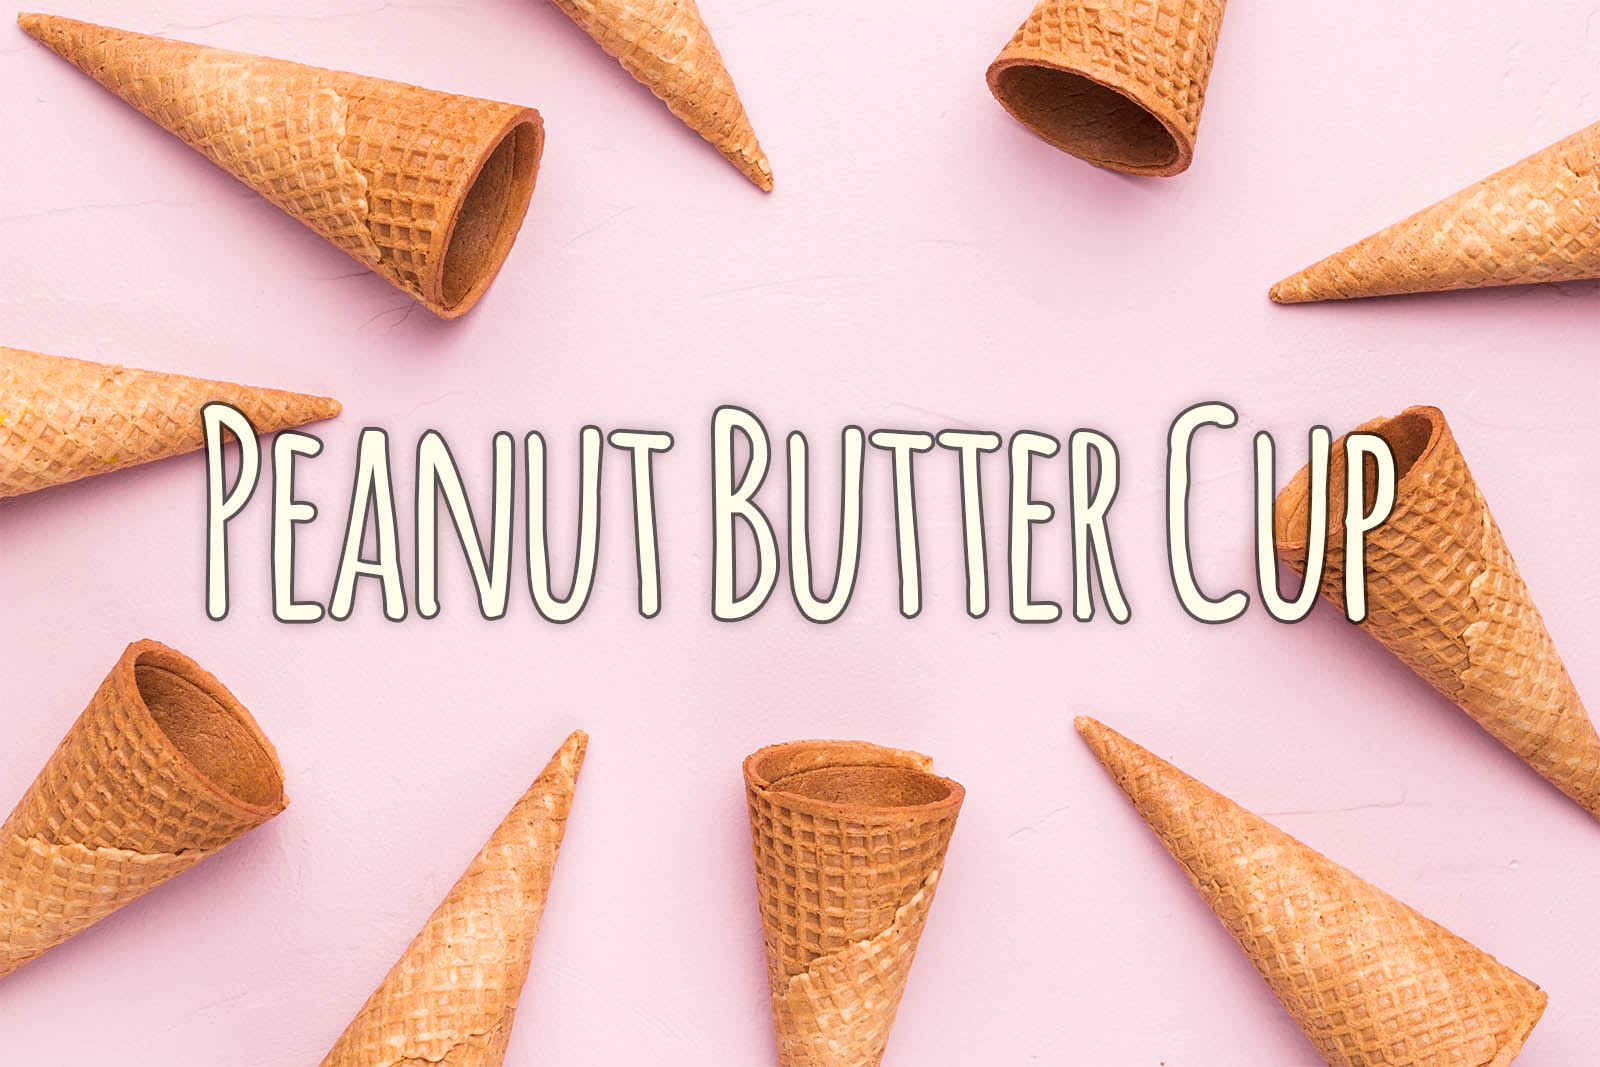 🍦 I’m Pretty Sure You Can’t Identify More Than 15/18 of These Ice Cream Flavors Title Peanut Butter Cup Ice Cream